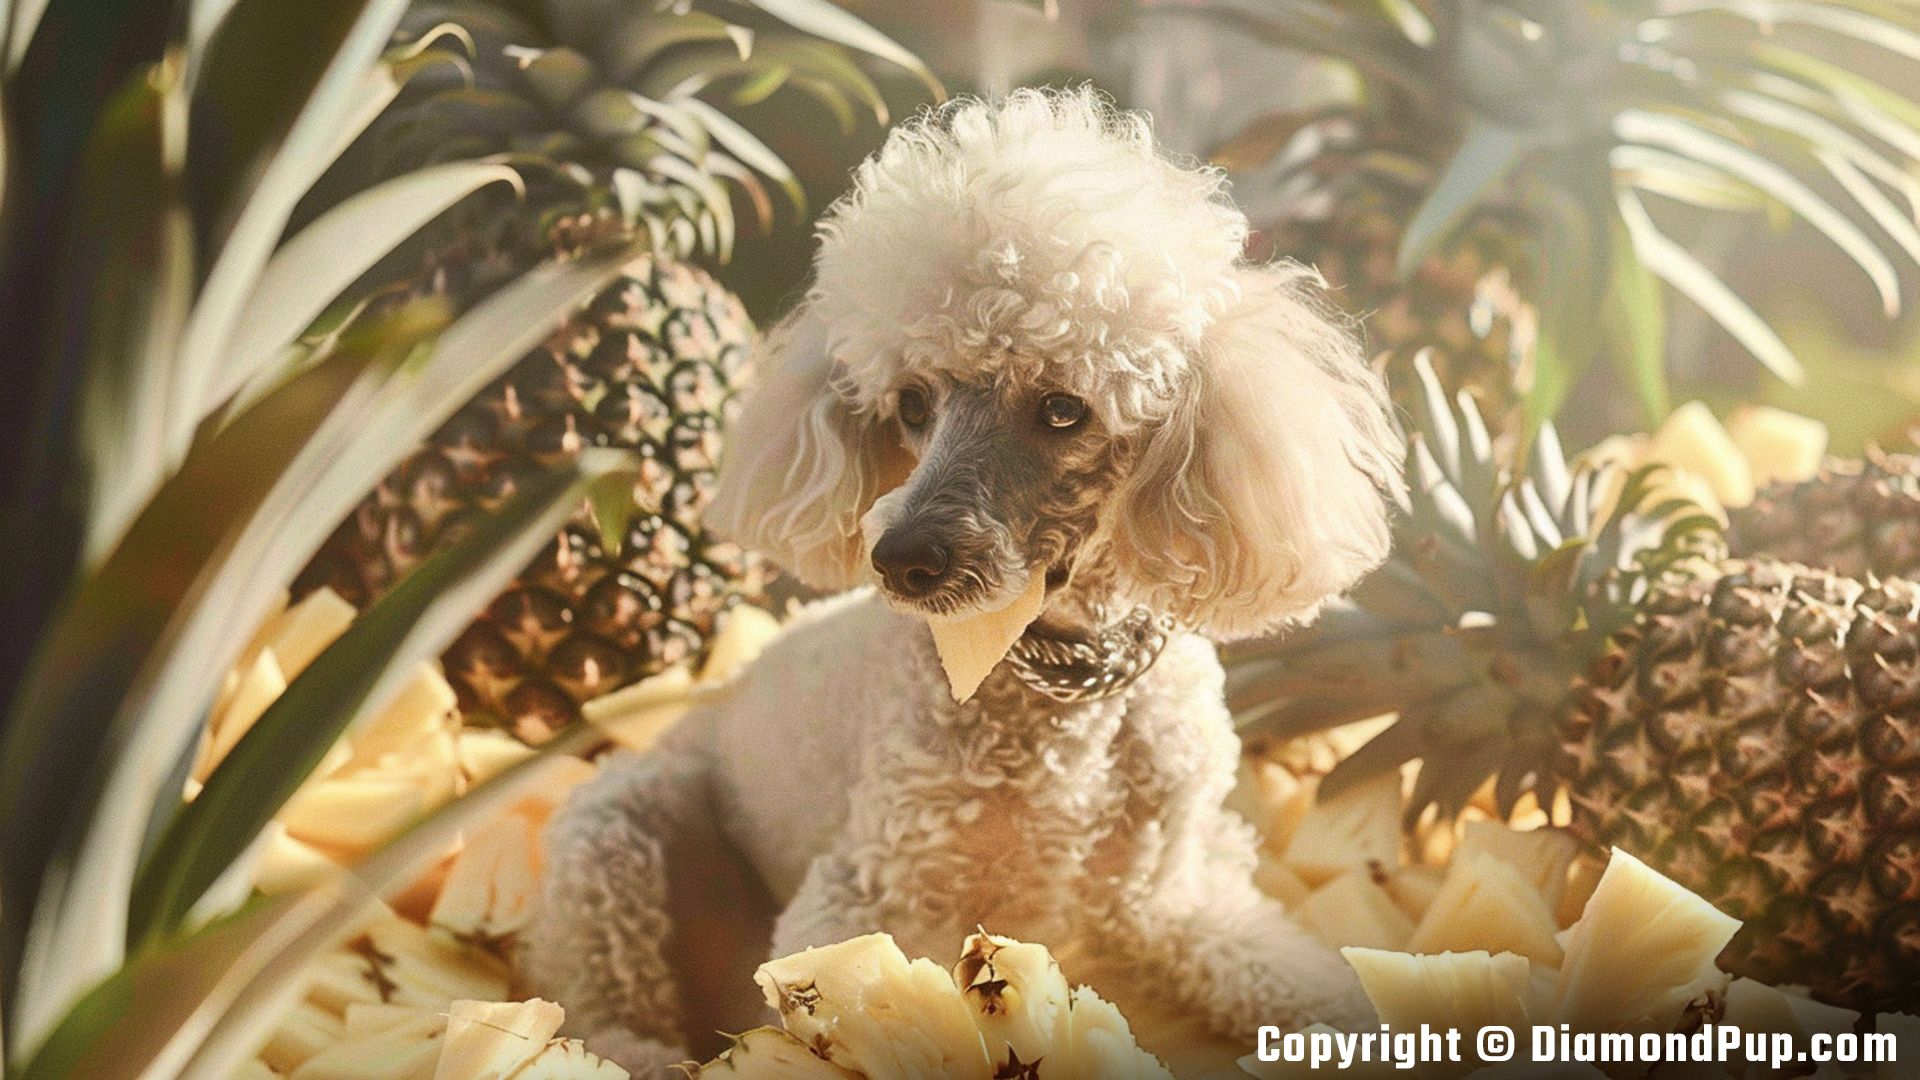 Image of an Adorable Poodle Eating Pineapple